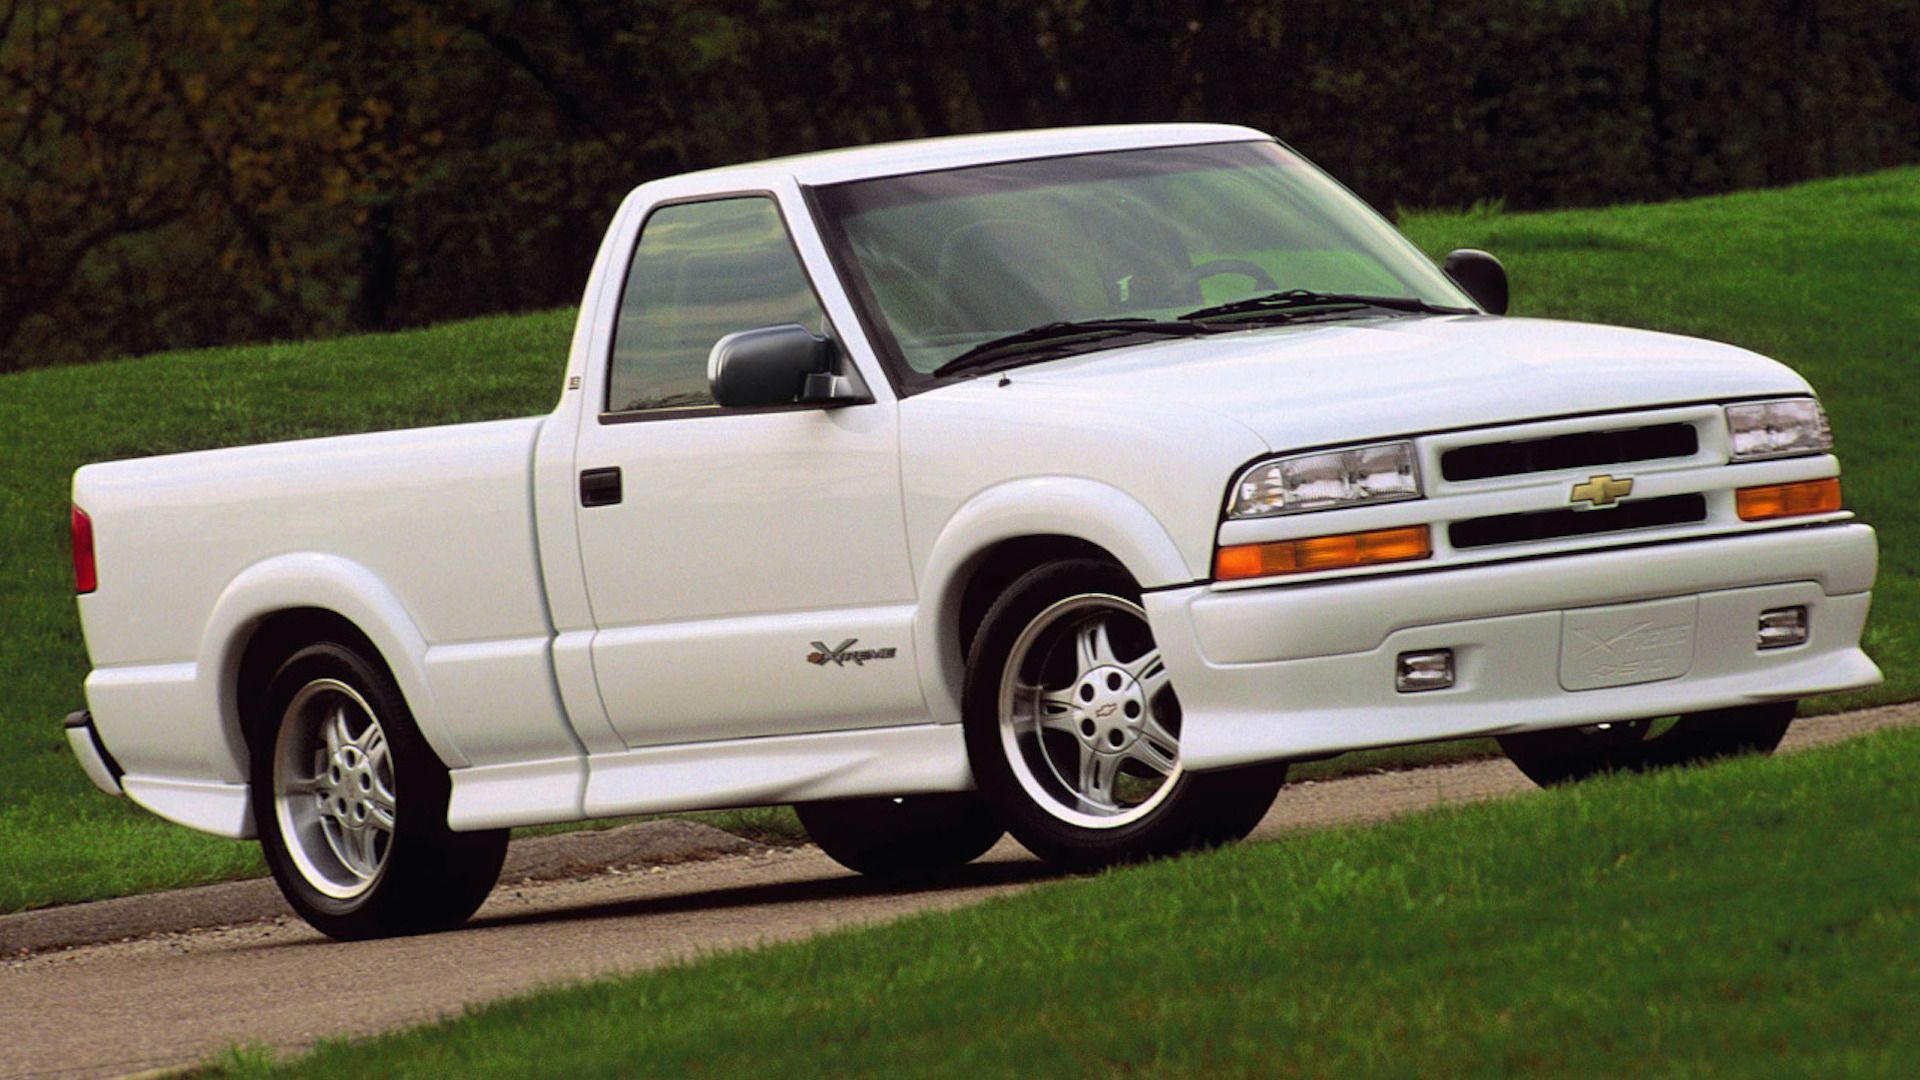 A white Chevy S10 Extreme truck stands parked on a road.